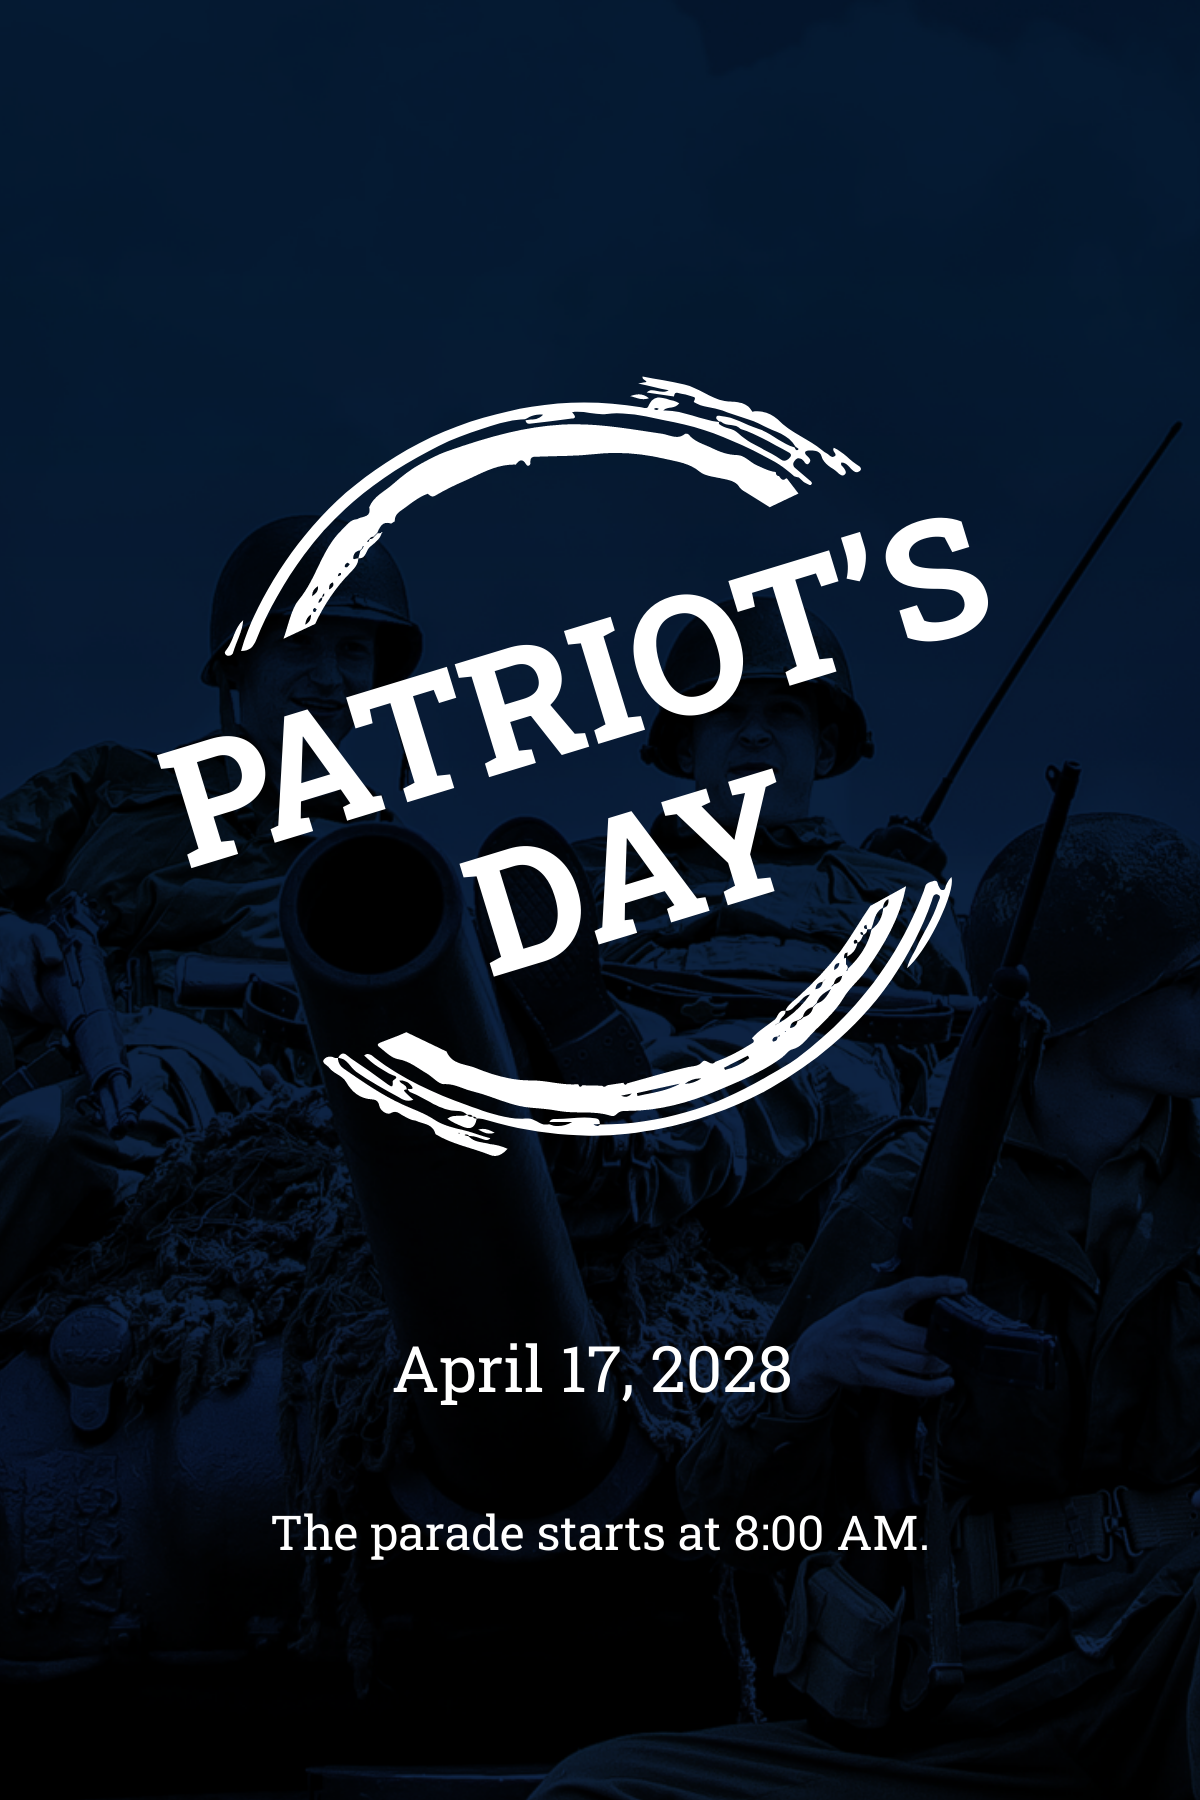 Patriot's Day Pinterest Pin Template